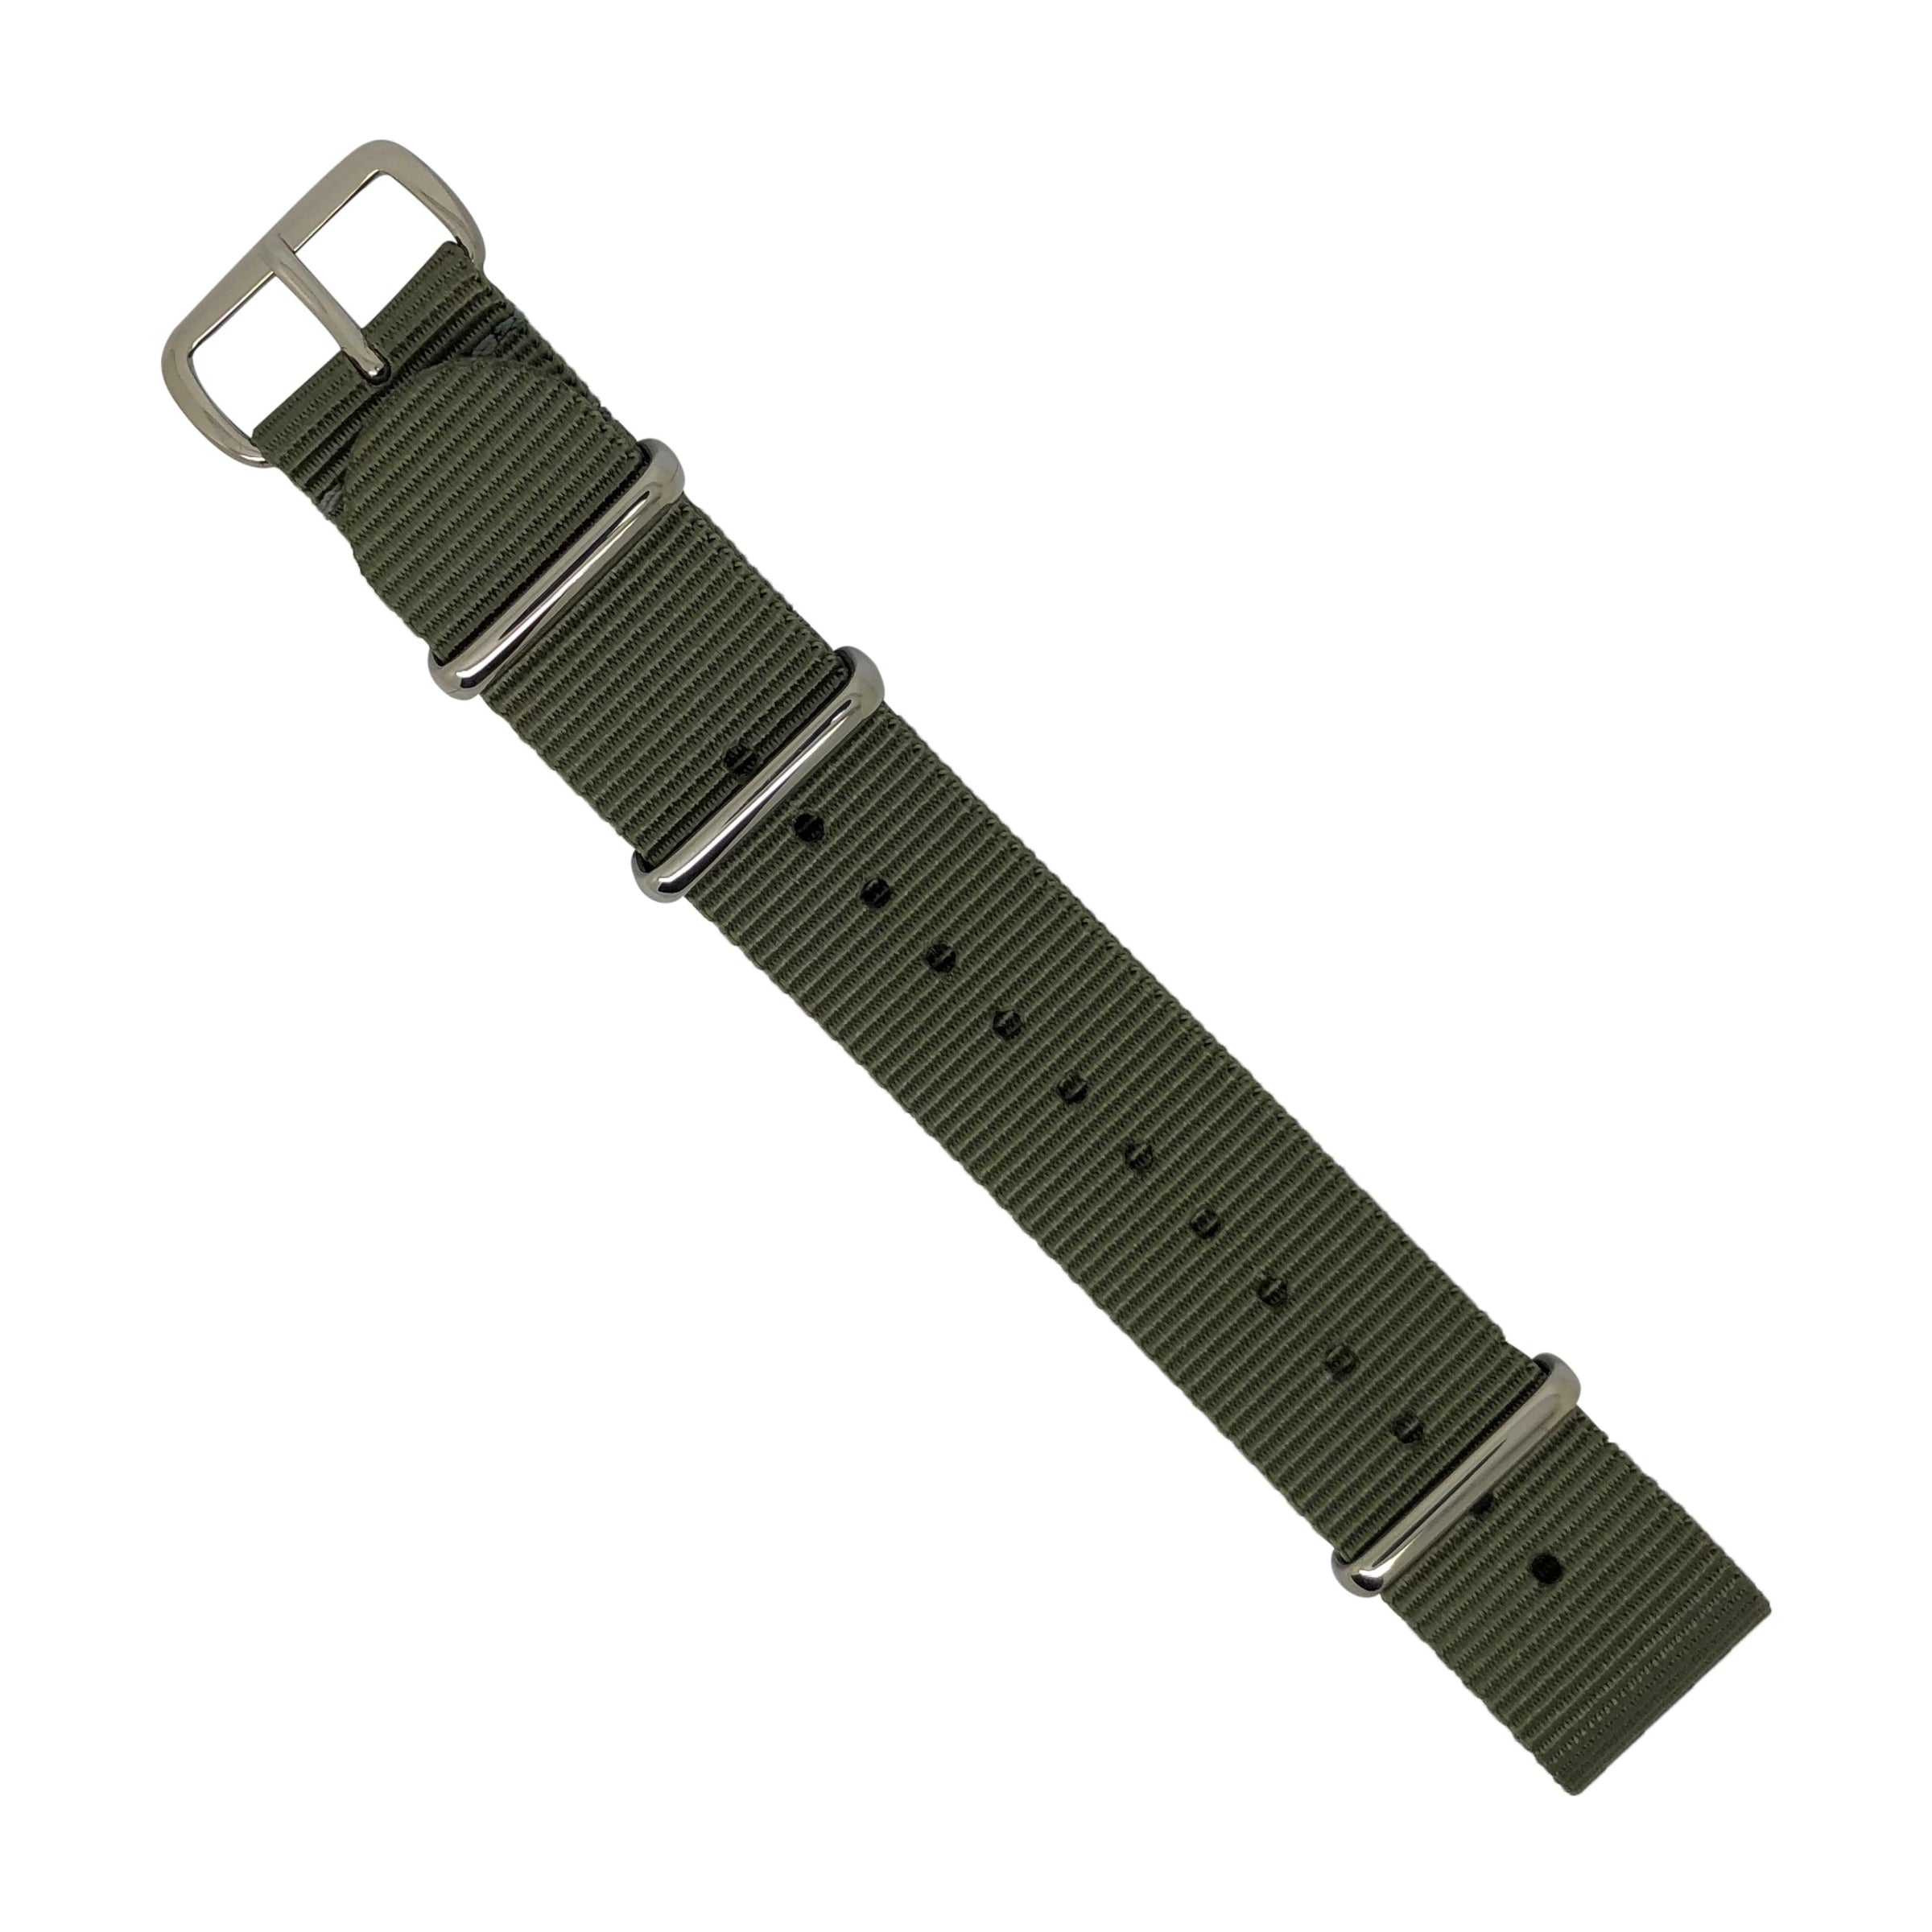 Premium Nato Strap in Grey with Polished Silver Buckle (20mm) - Nomad watch Works